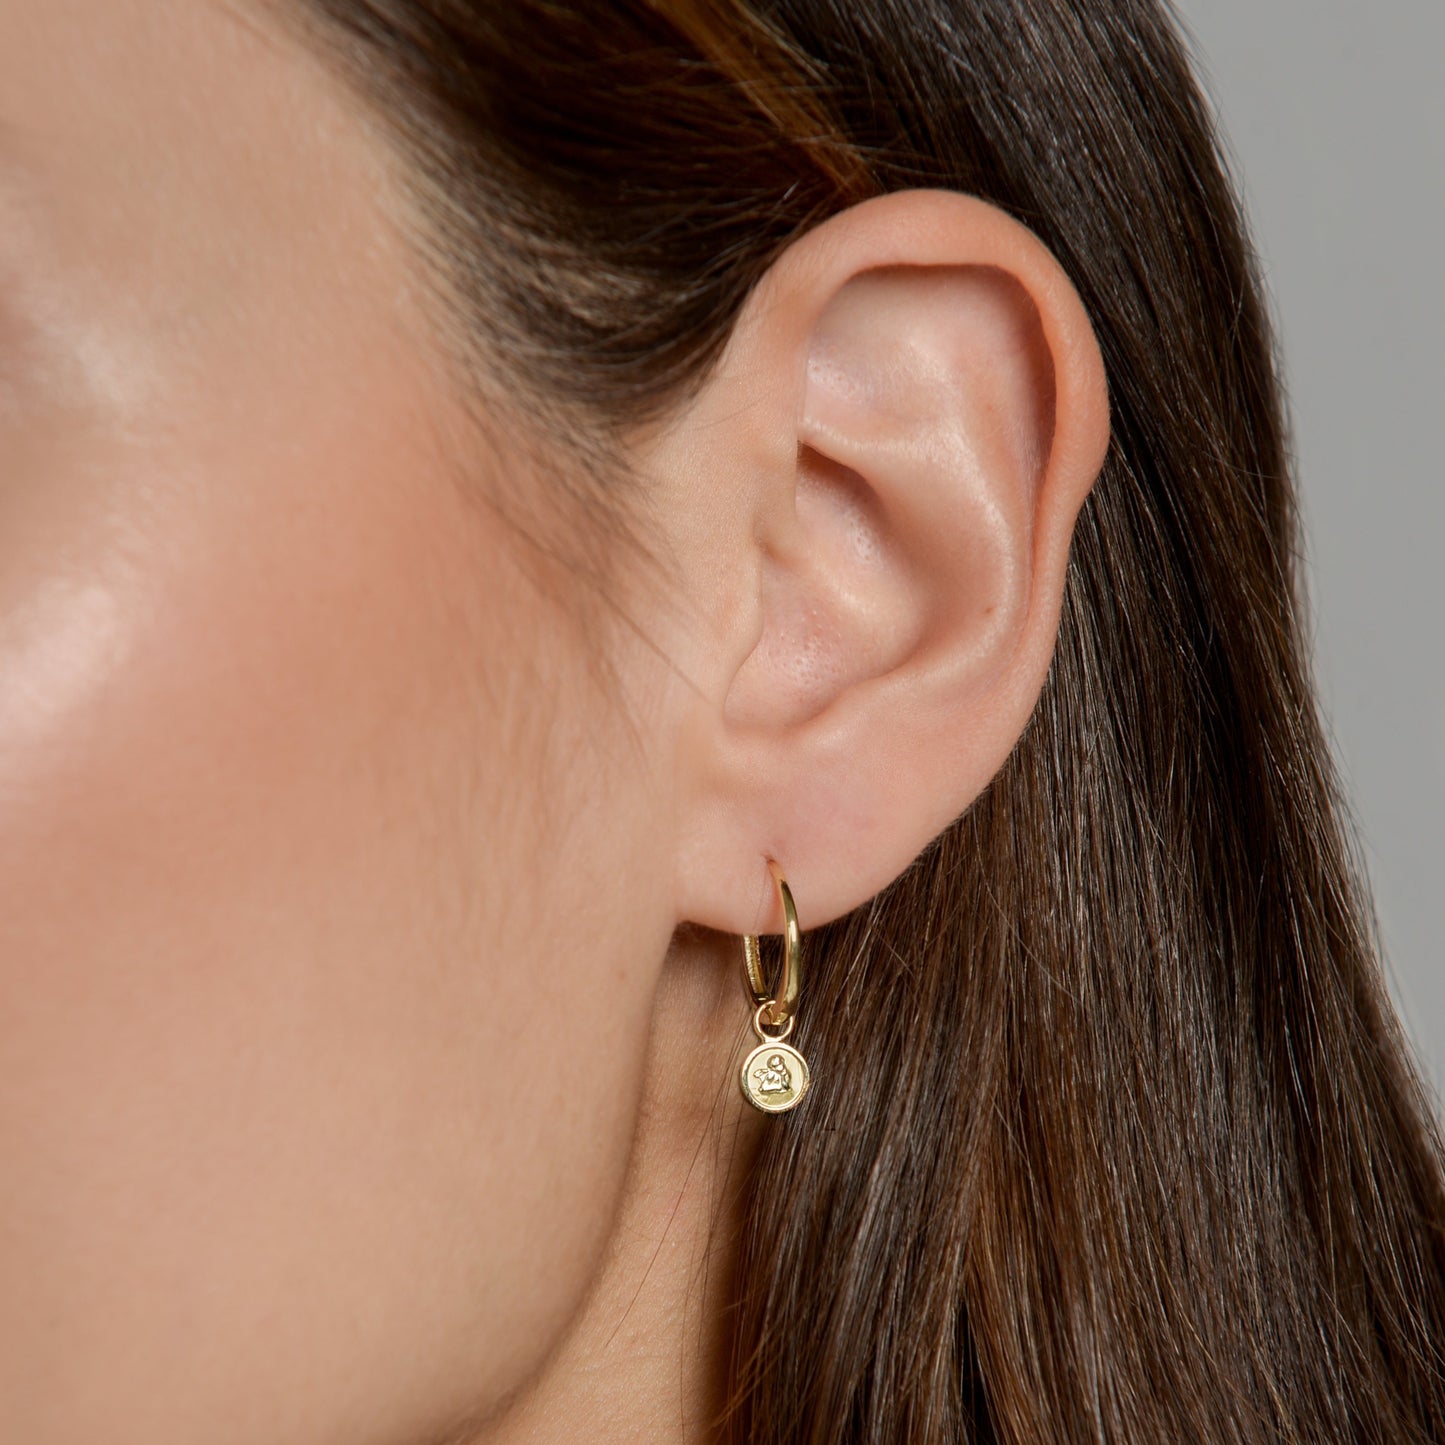 Anna wearing our Angel Earring Pendant with our 18ct Gold Closed Hoop by McFarlane Fine Jewellery